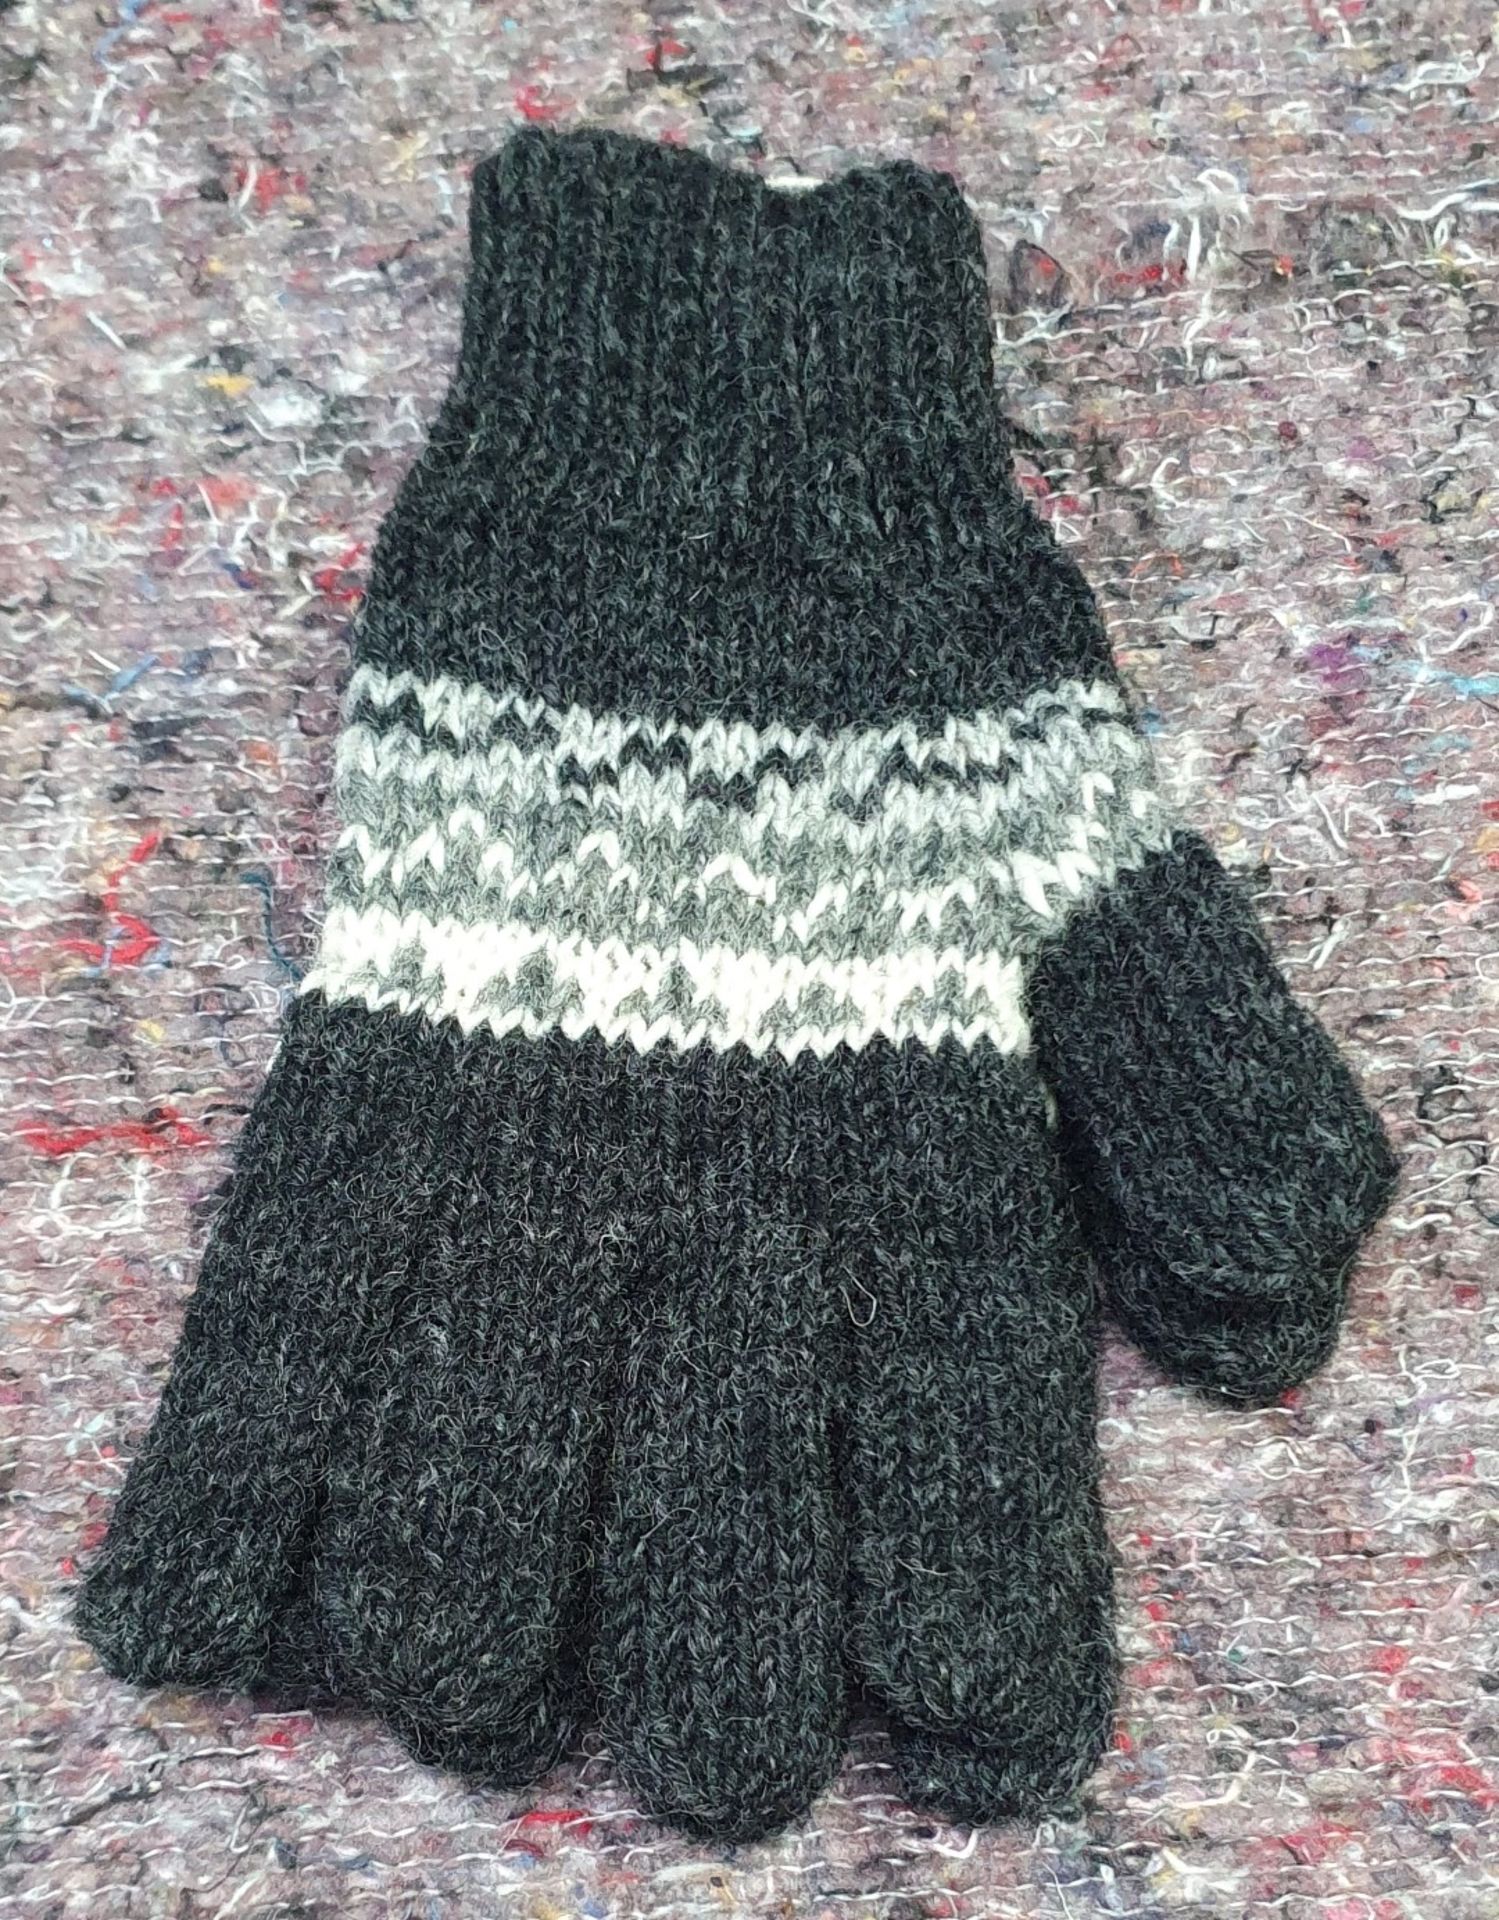 13 x Assorted Bobble Hats and Woolly Gloves by From The Source - New Stock - Ref: TCH236 - CL840 - - Image 21 of 24